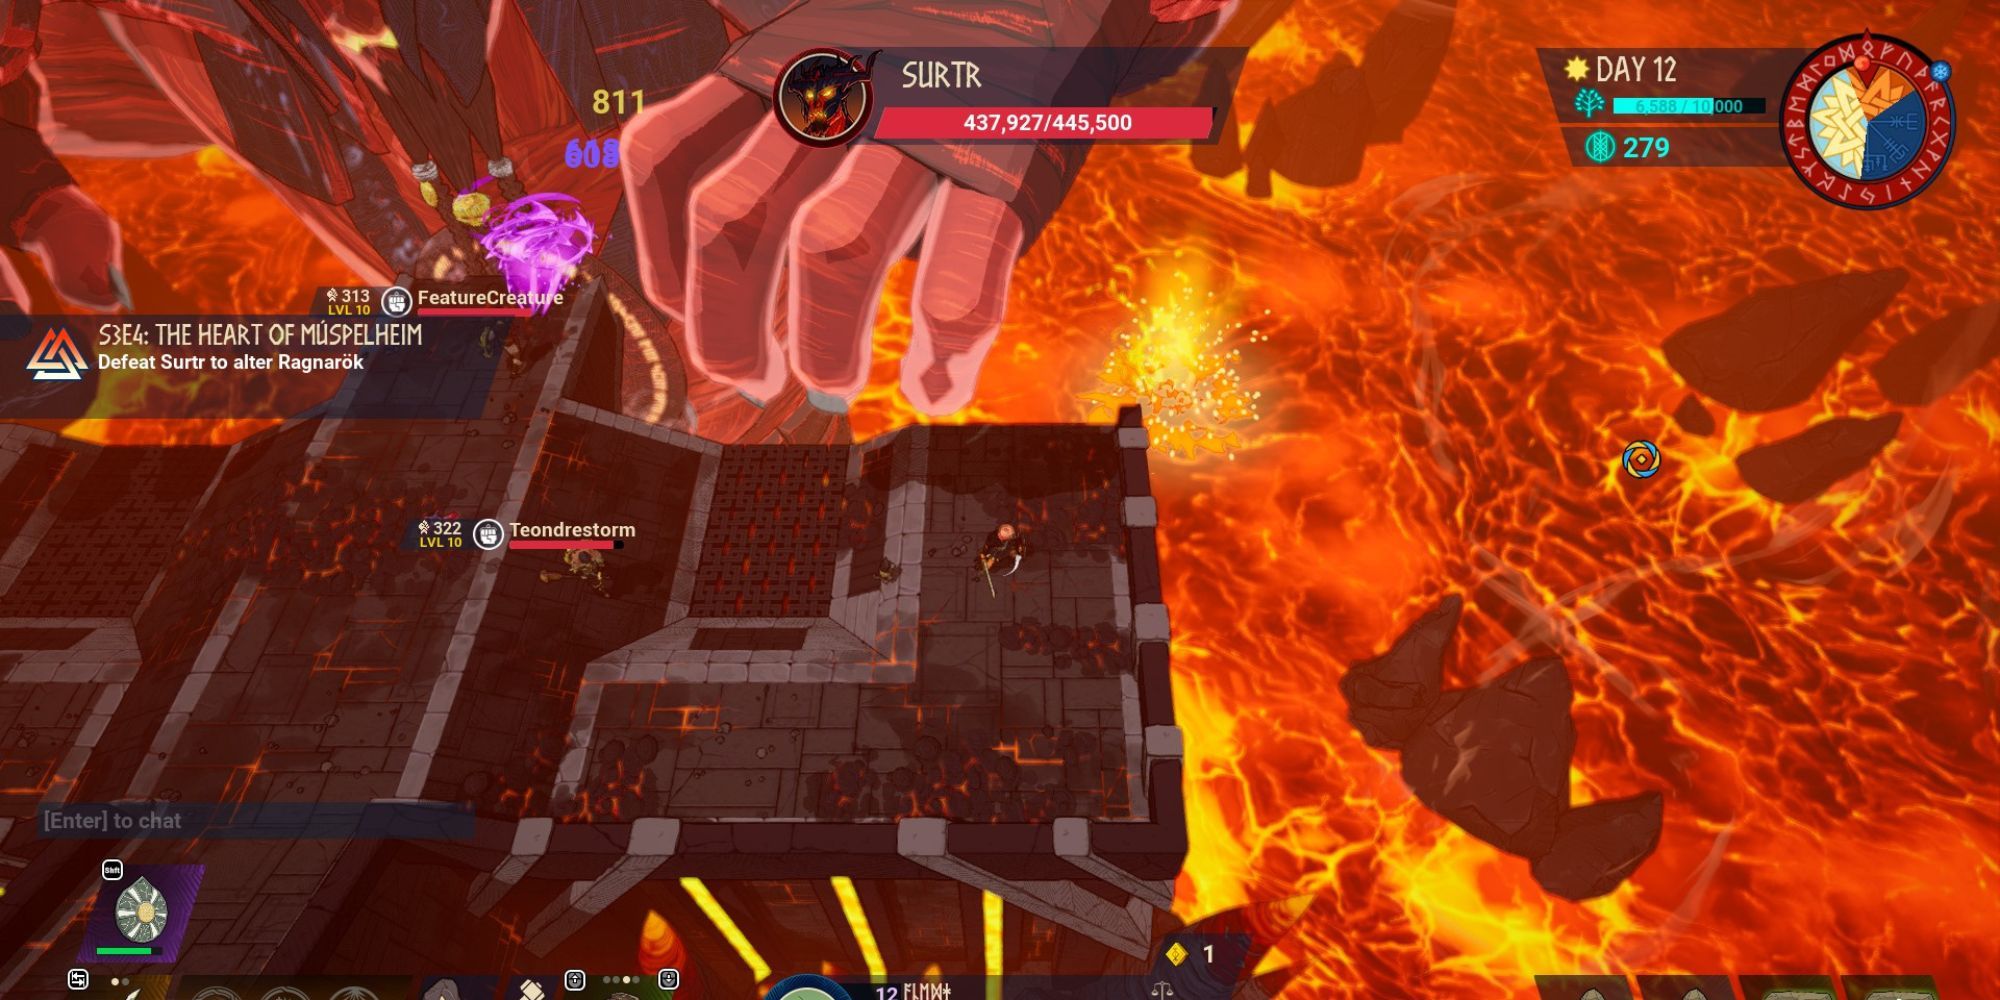 players attack Surtr from different points, with one melee in center and two ranged 